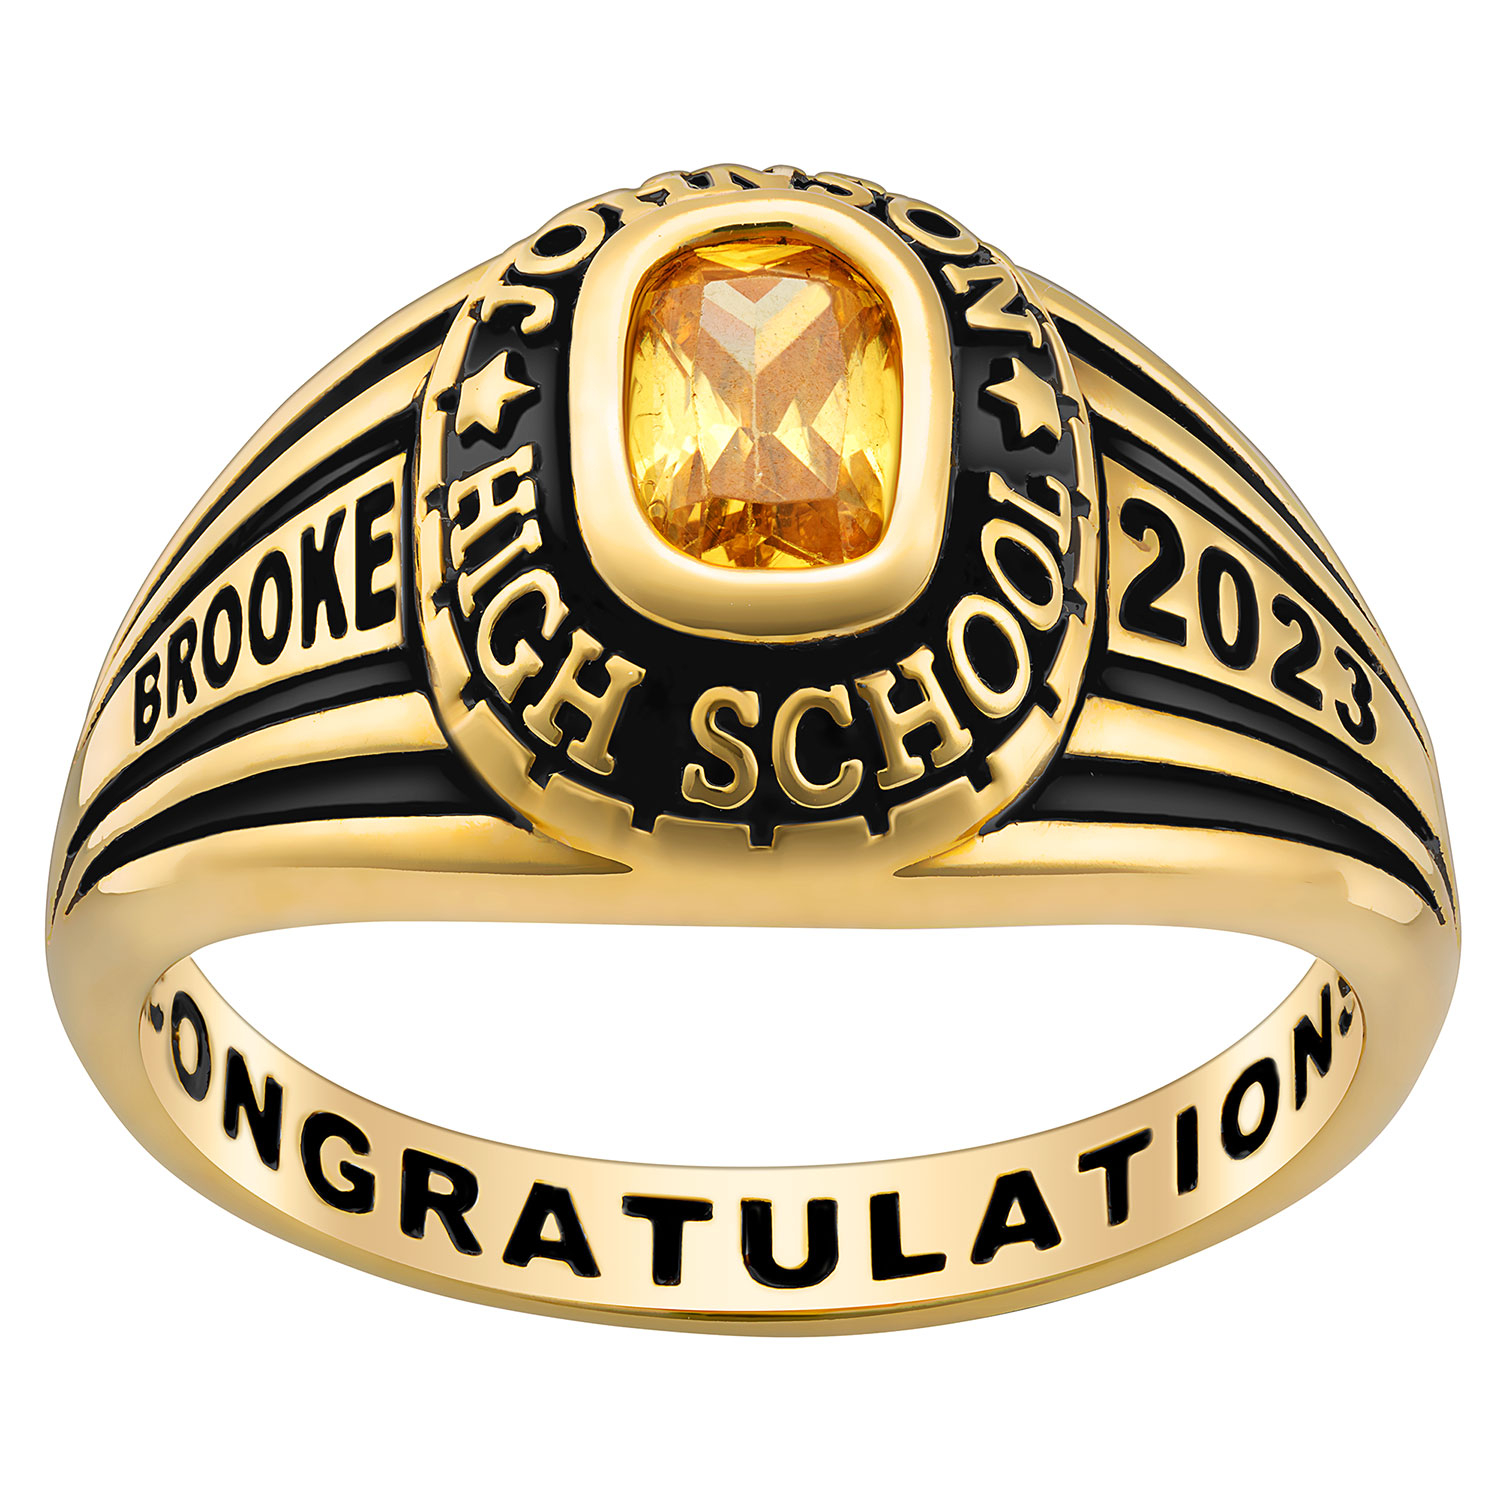 Ladies' 14K Gold over Sterling Traditional Class Ring